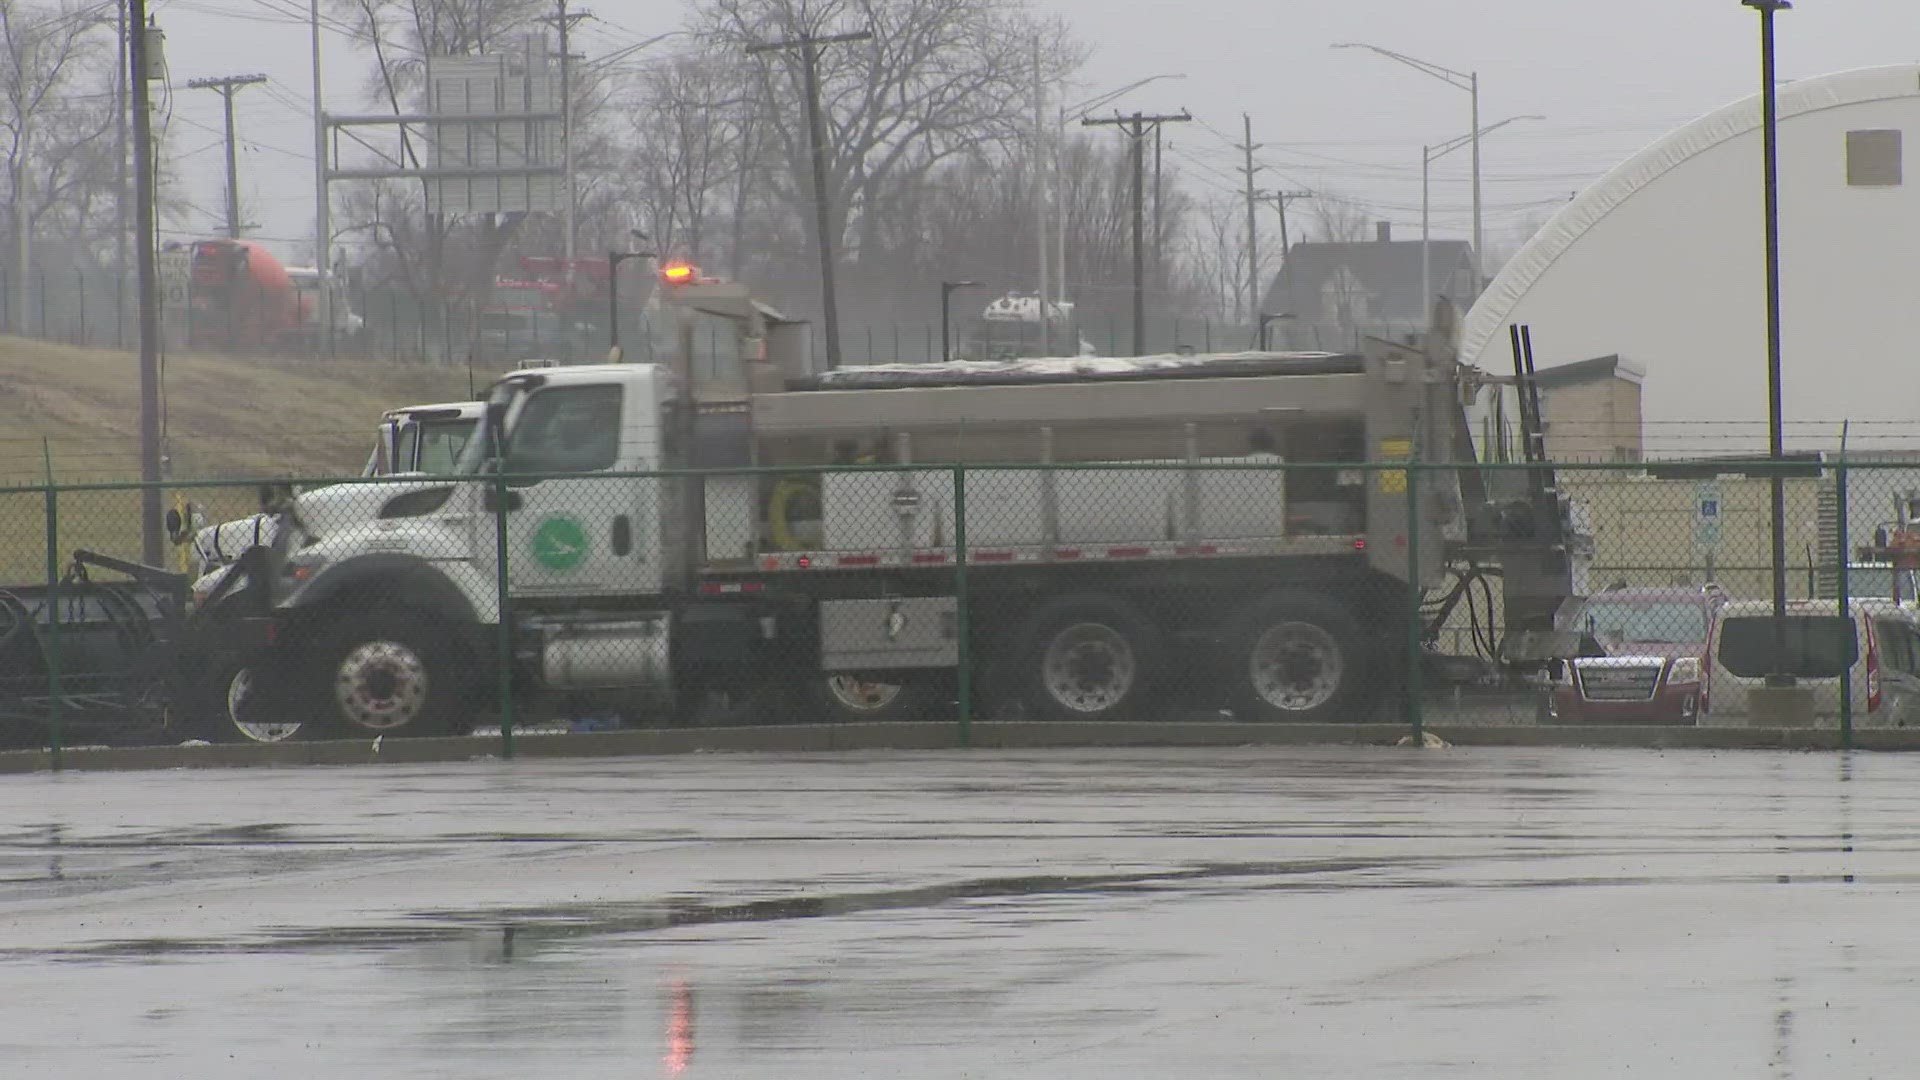 Officials from ODOT spent the morning and early afternoon watching when the rain would turn into snow.